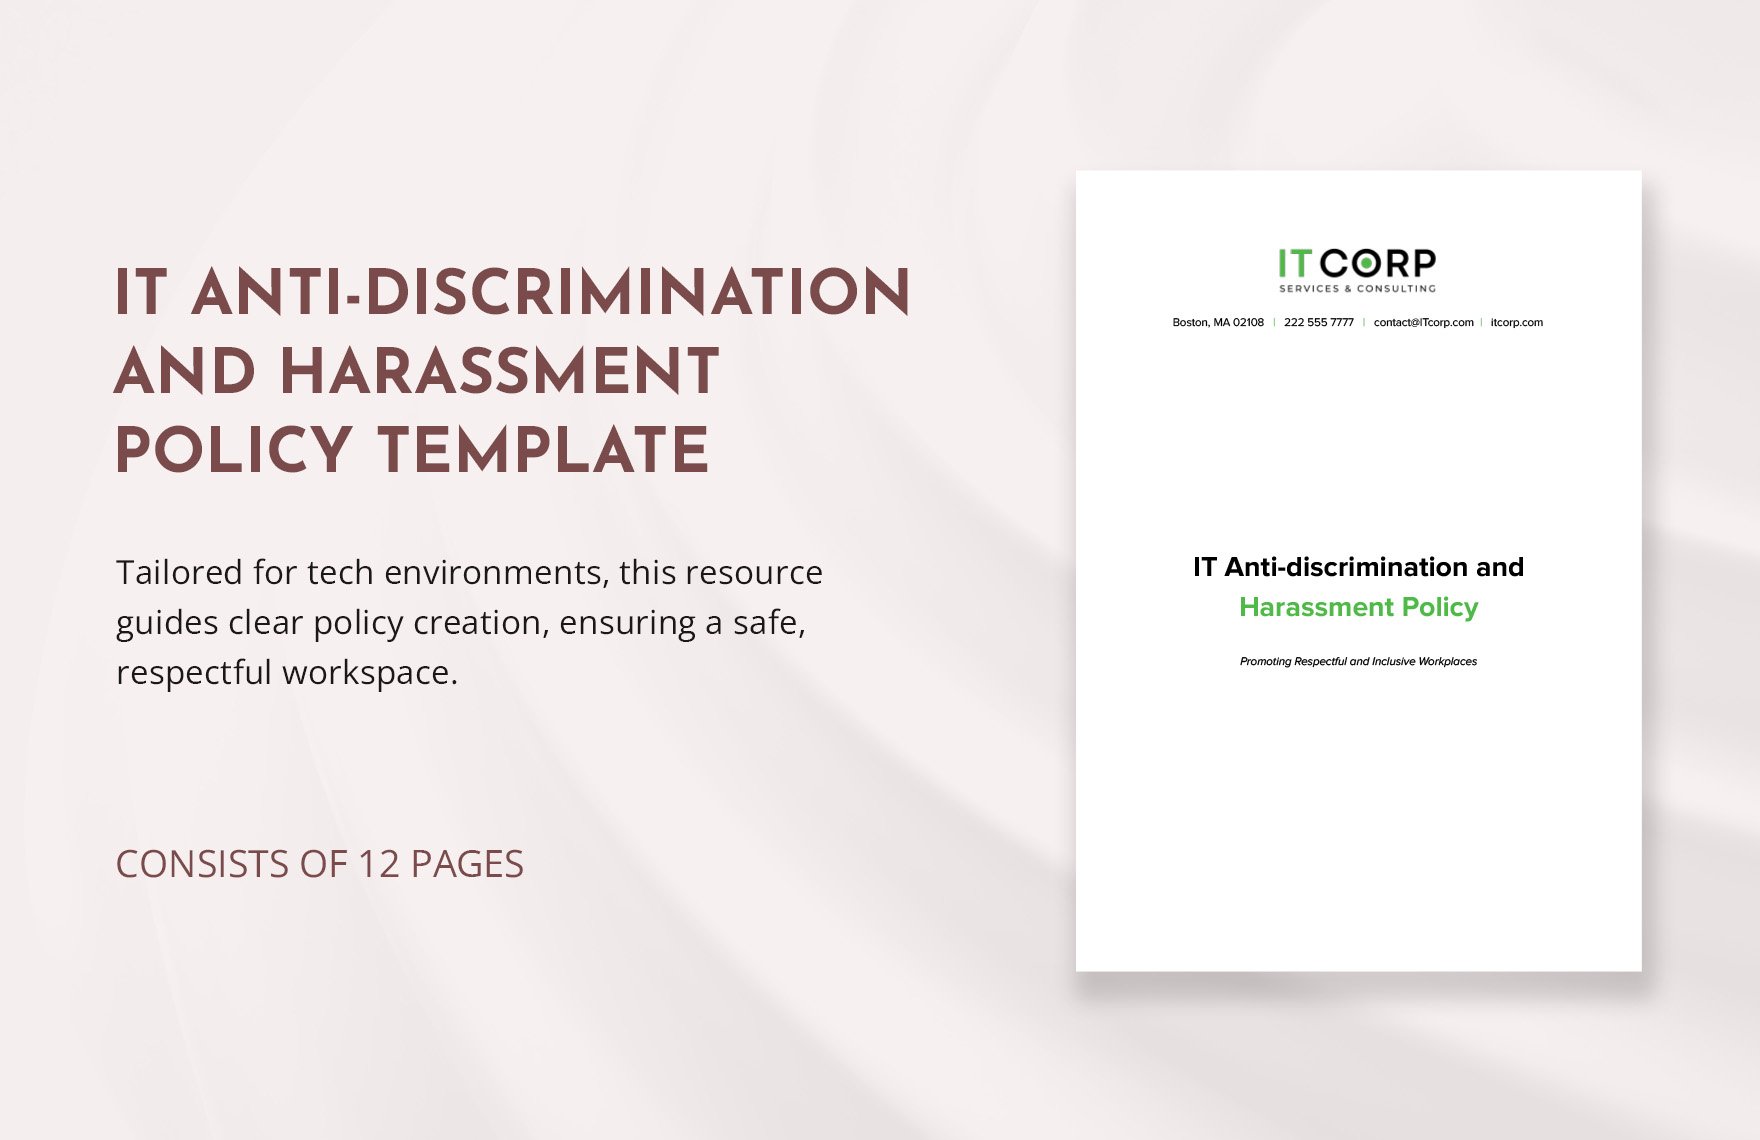 IT Anti-Discrimination and Harassment Policy Template